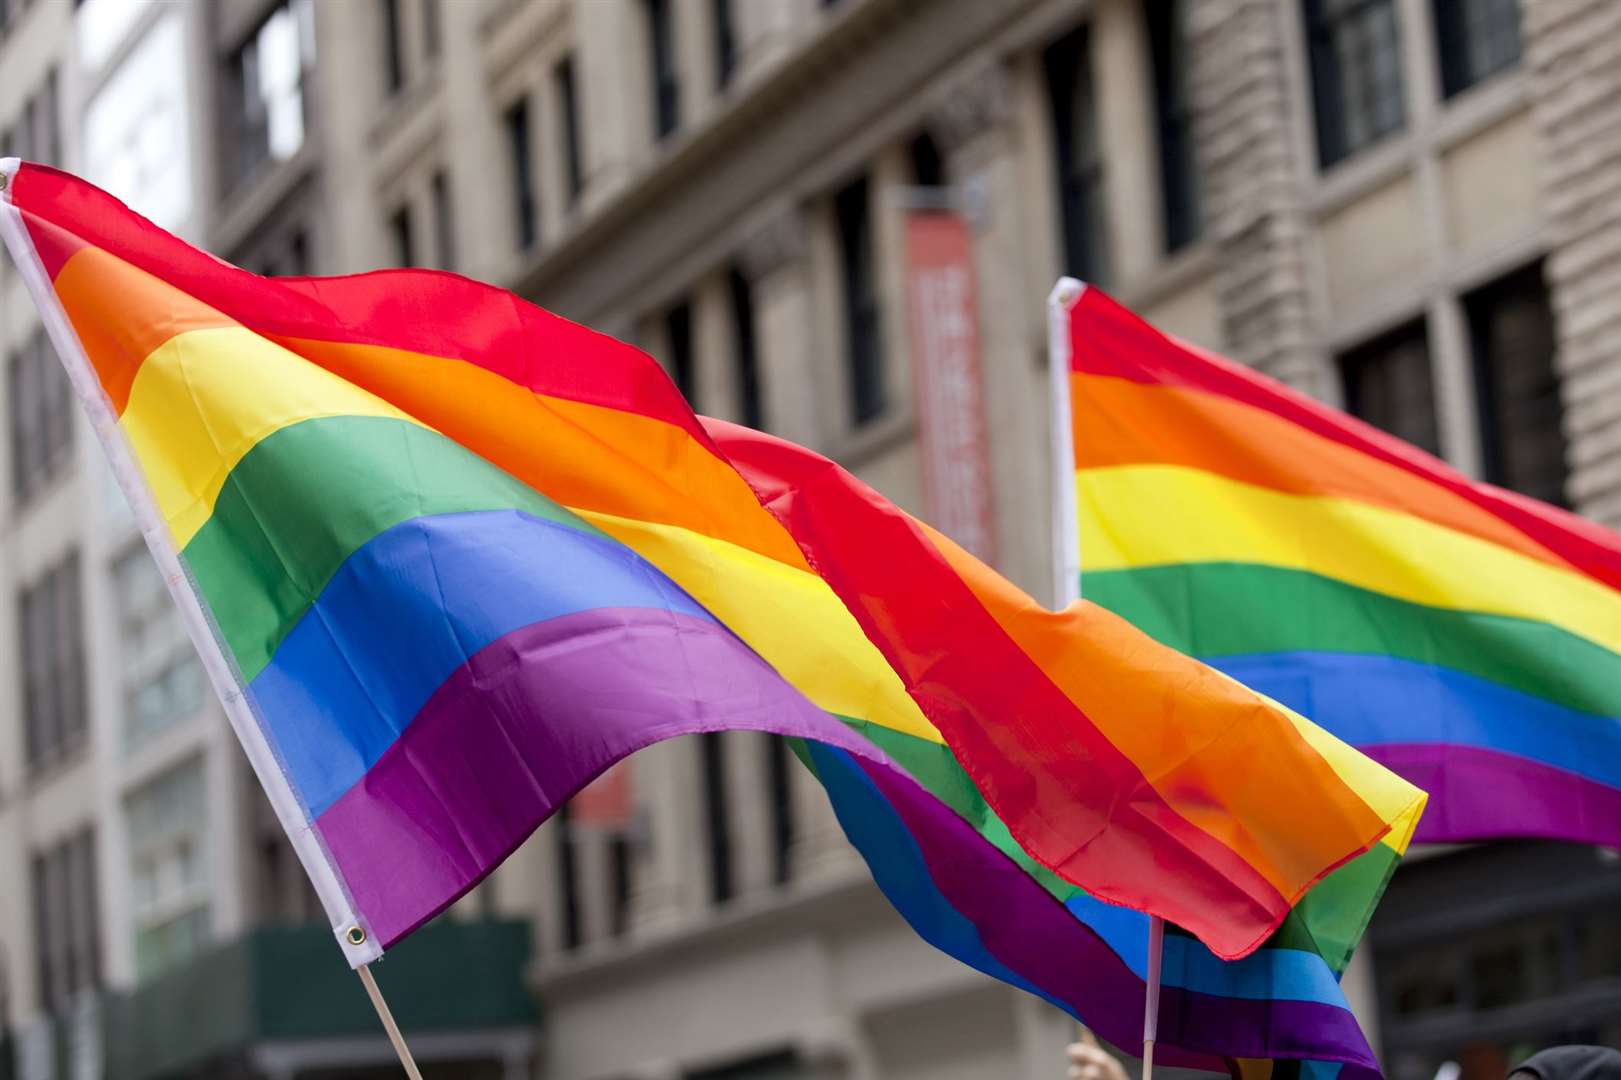 Rainbow flags will fly at two sites